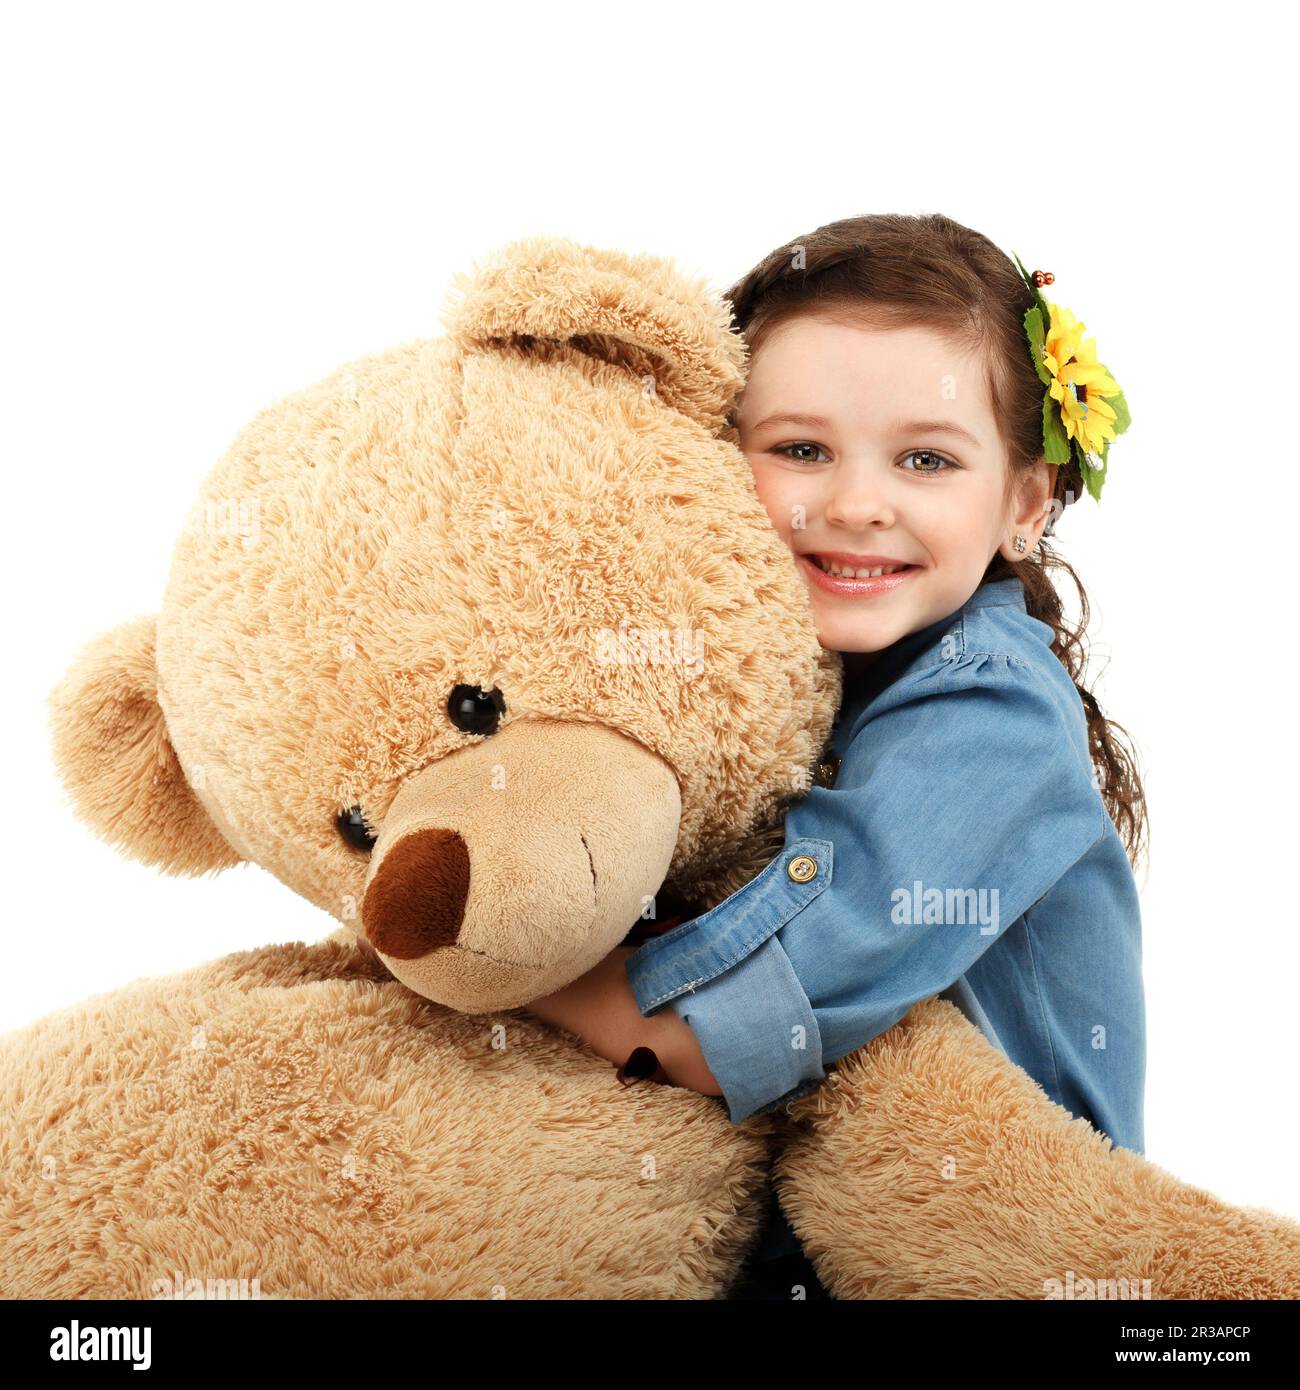 Little girl with big teddy bear having fun laughing Isolated on white ...